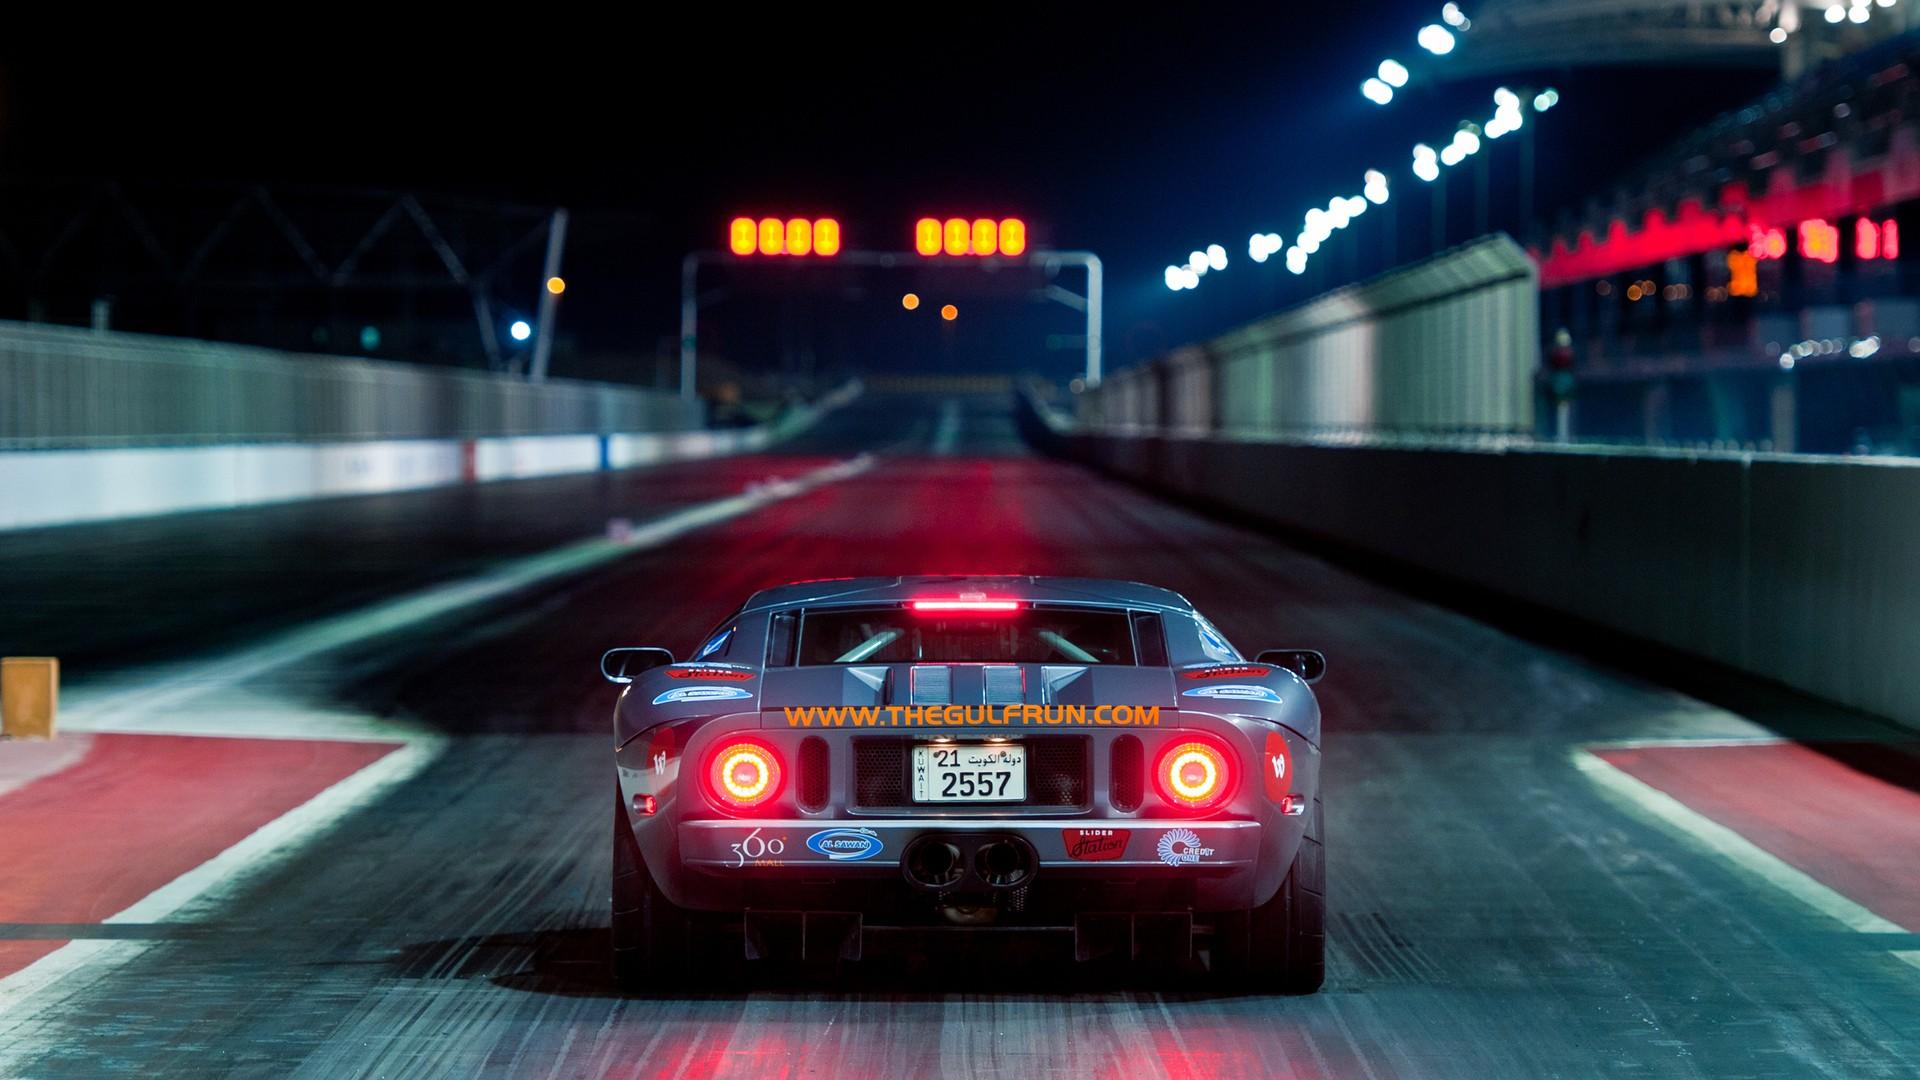 Ford Gt Wallpaper , Find HD Wallpaper For Free